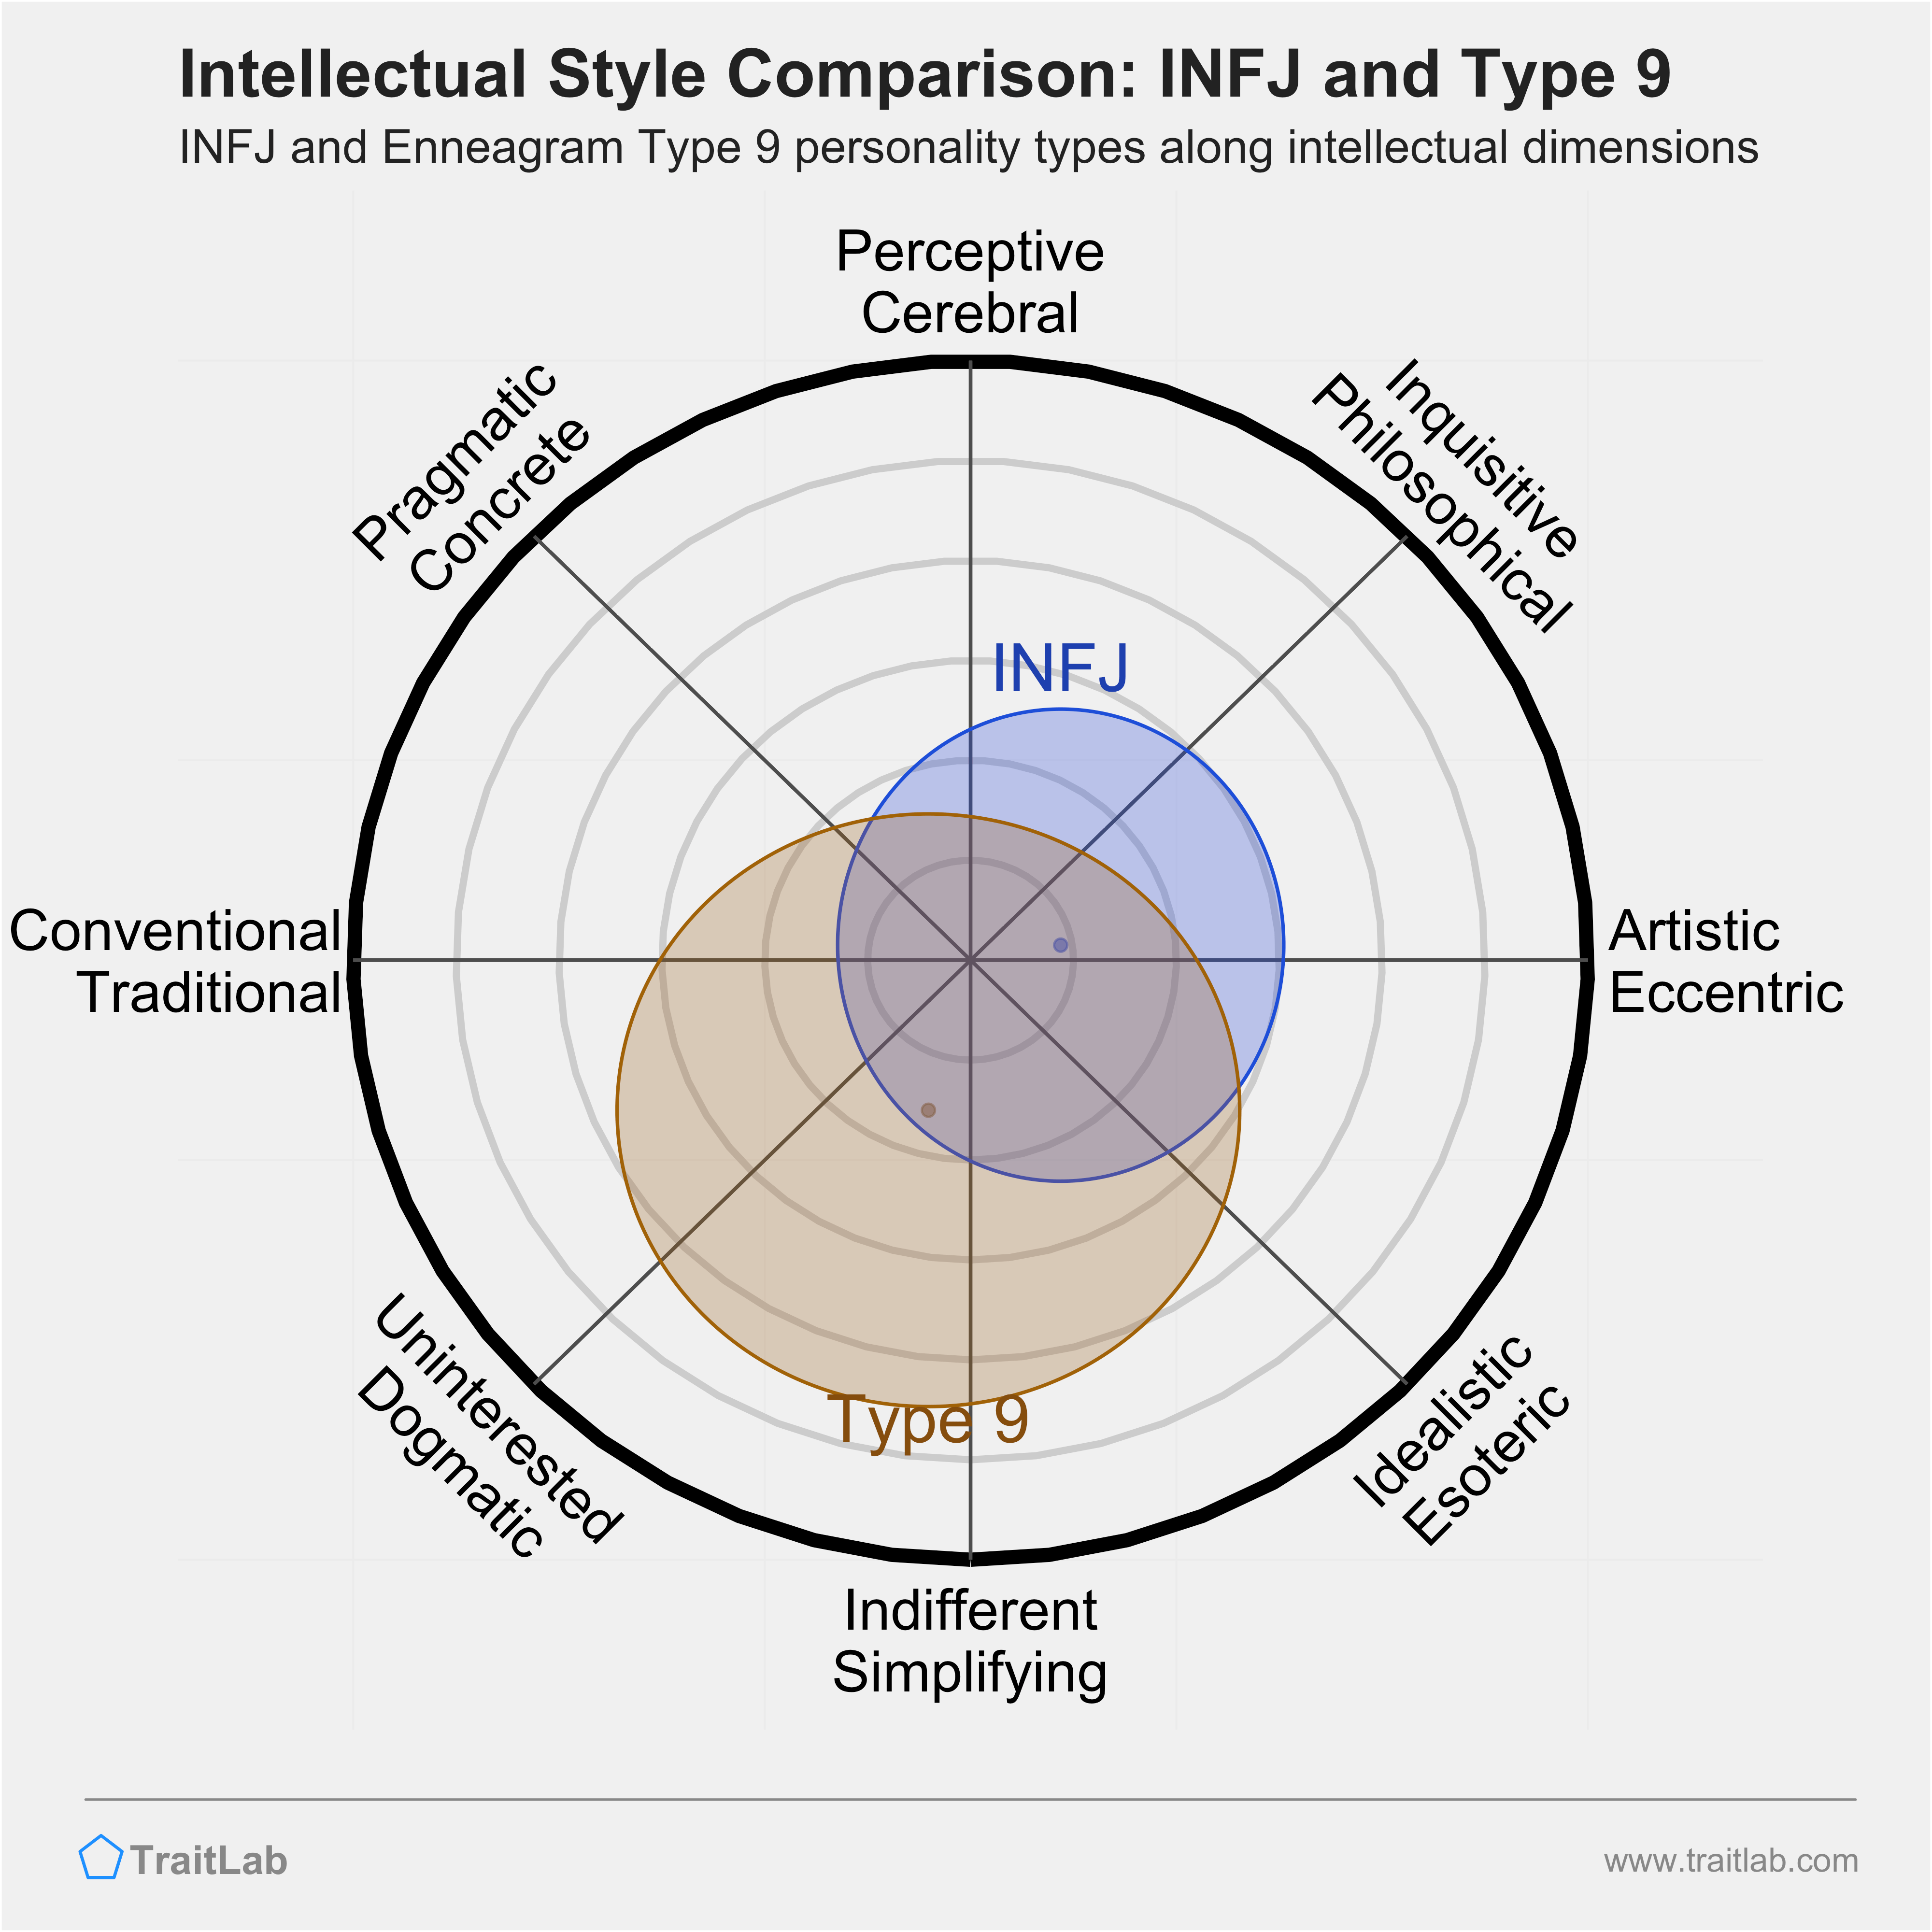 INFJ and Type 9 comparison across intellectual dimensions